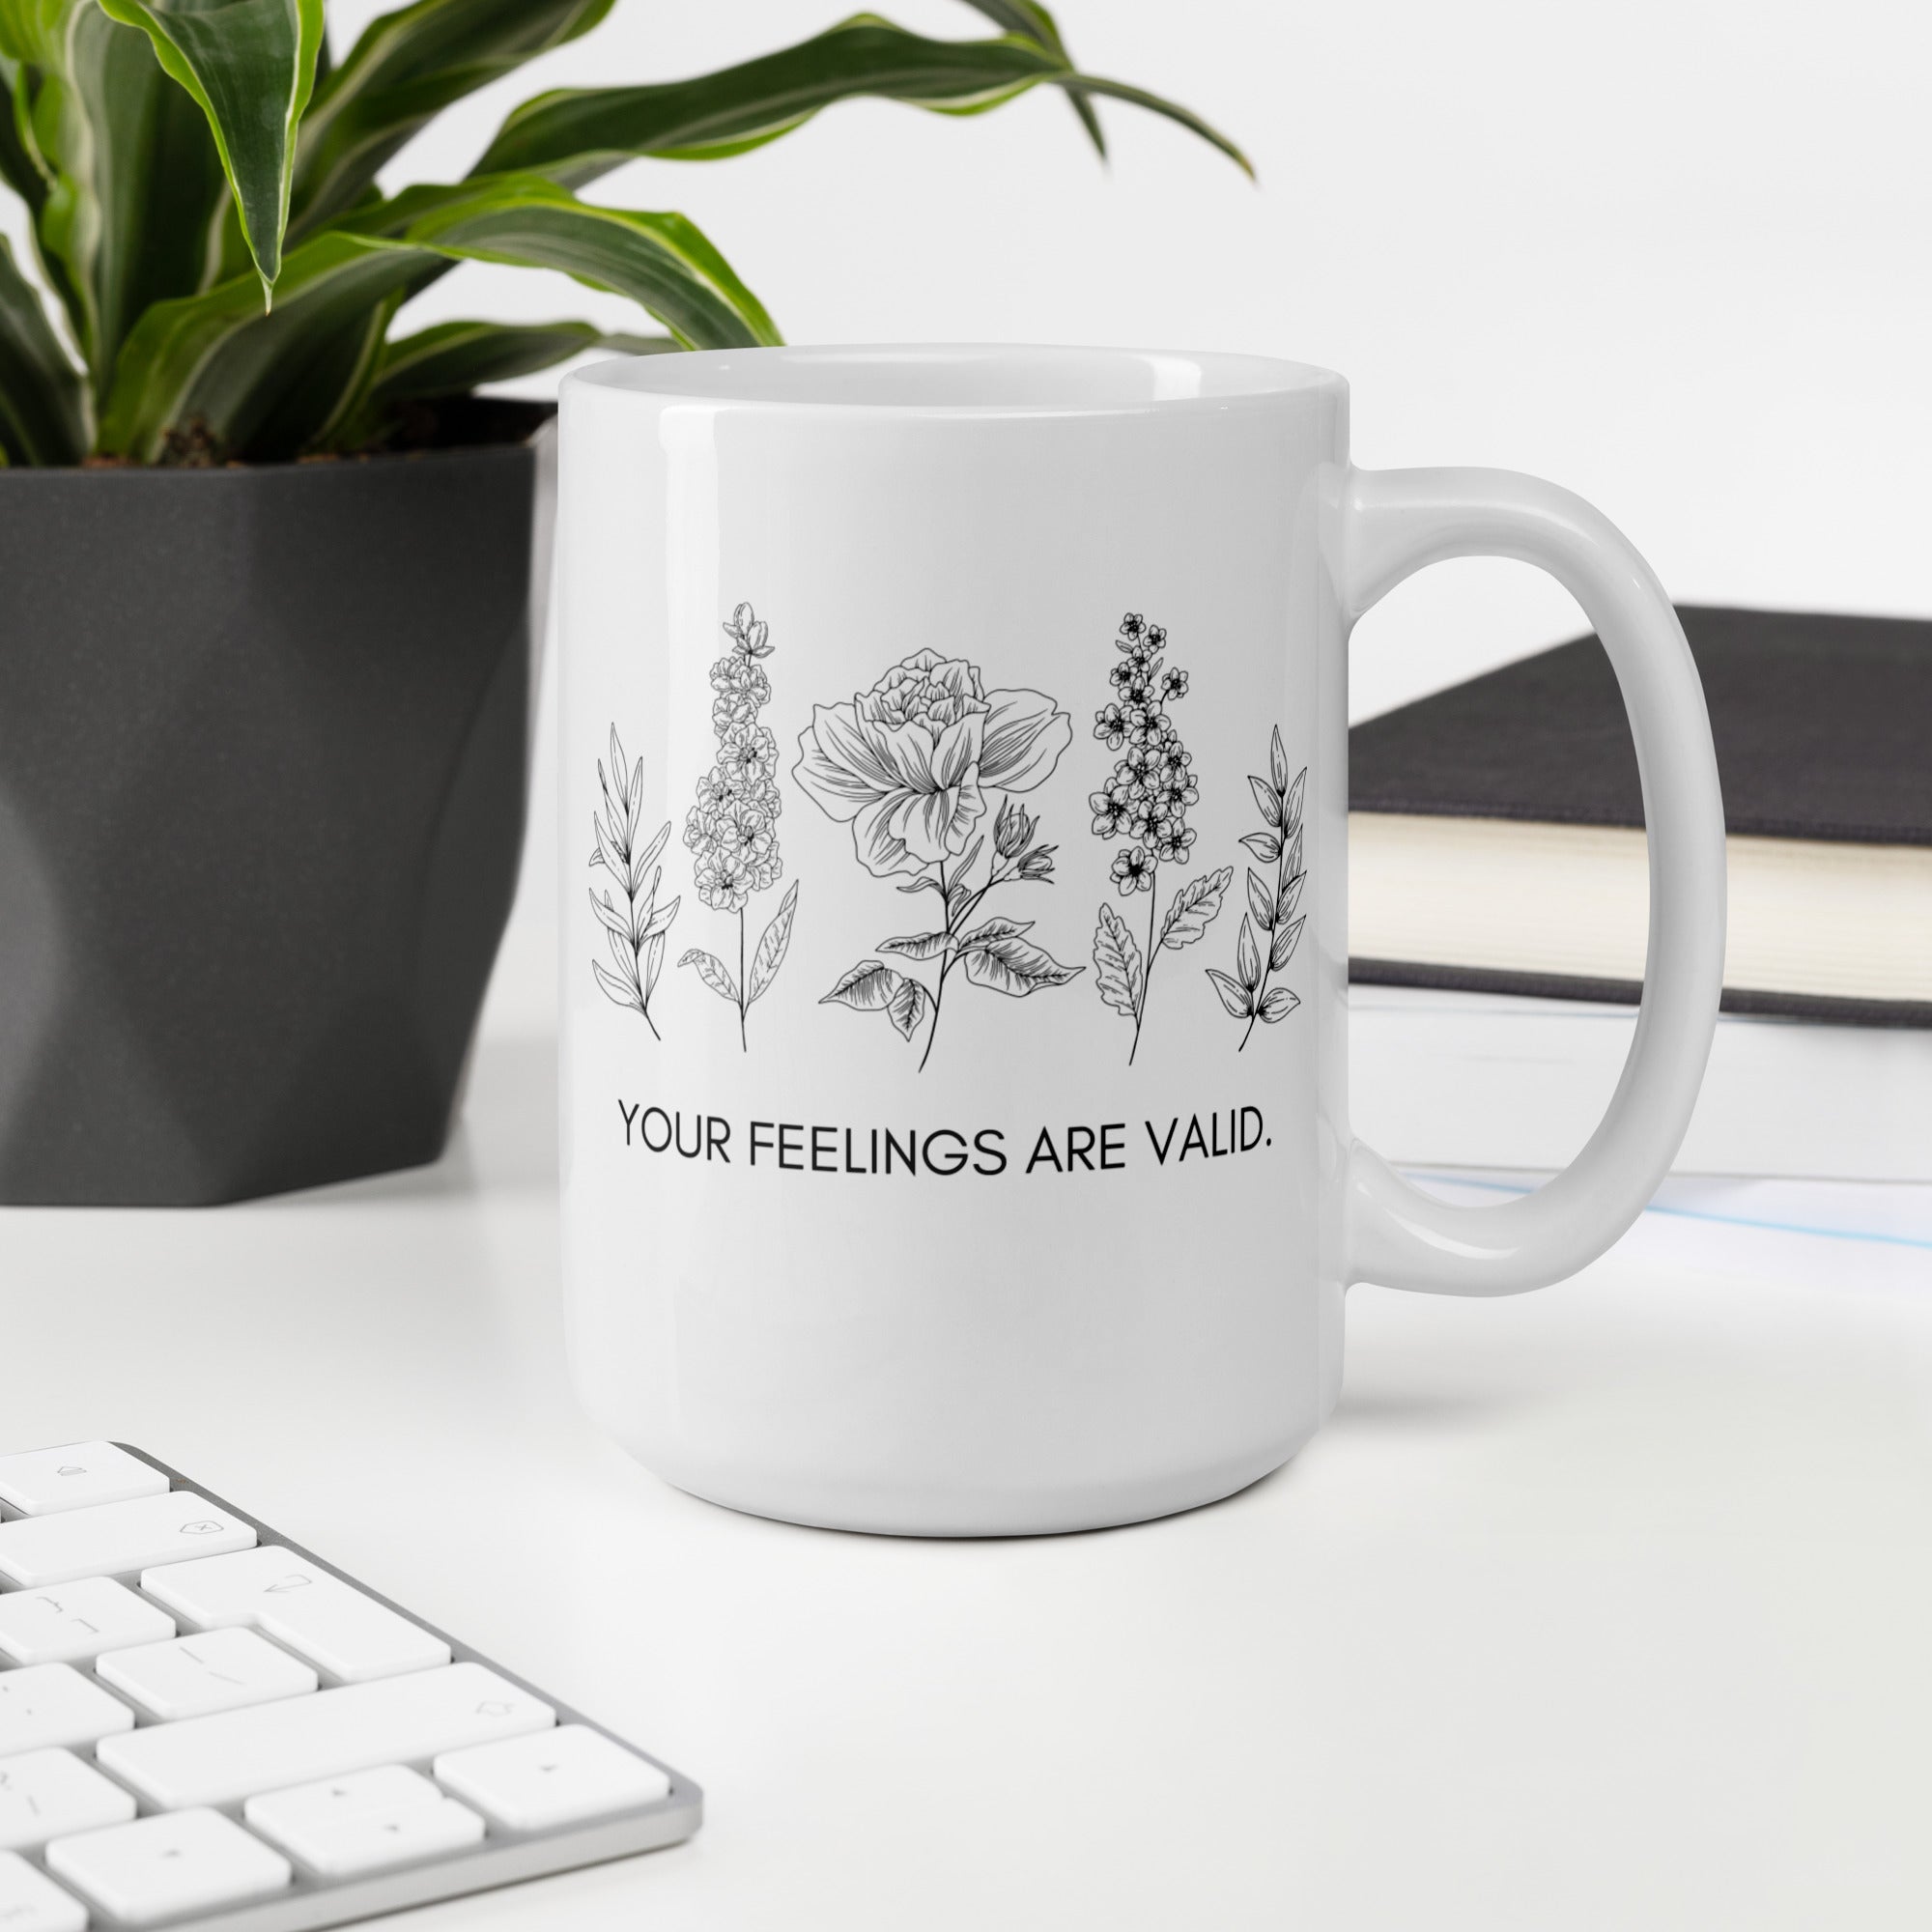 Your Feelings Are Valid - White Glossy Mug